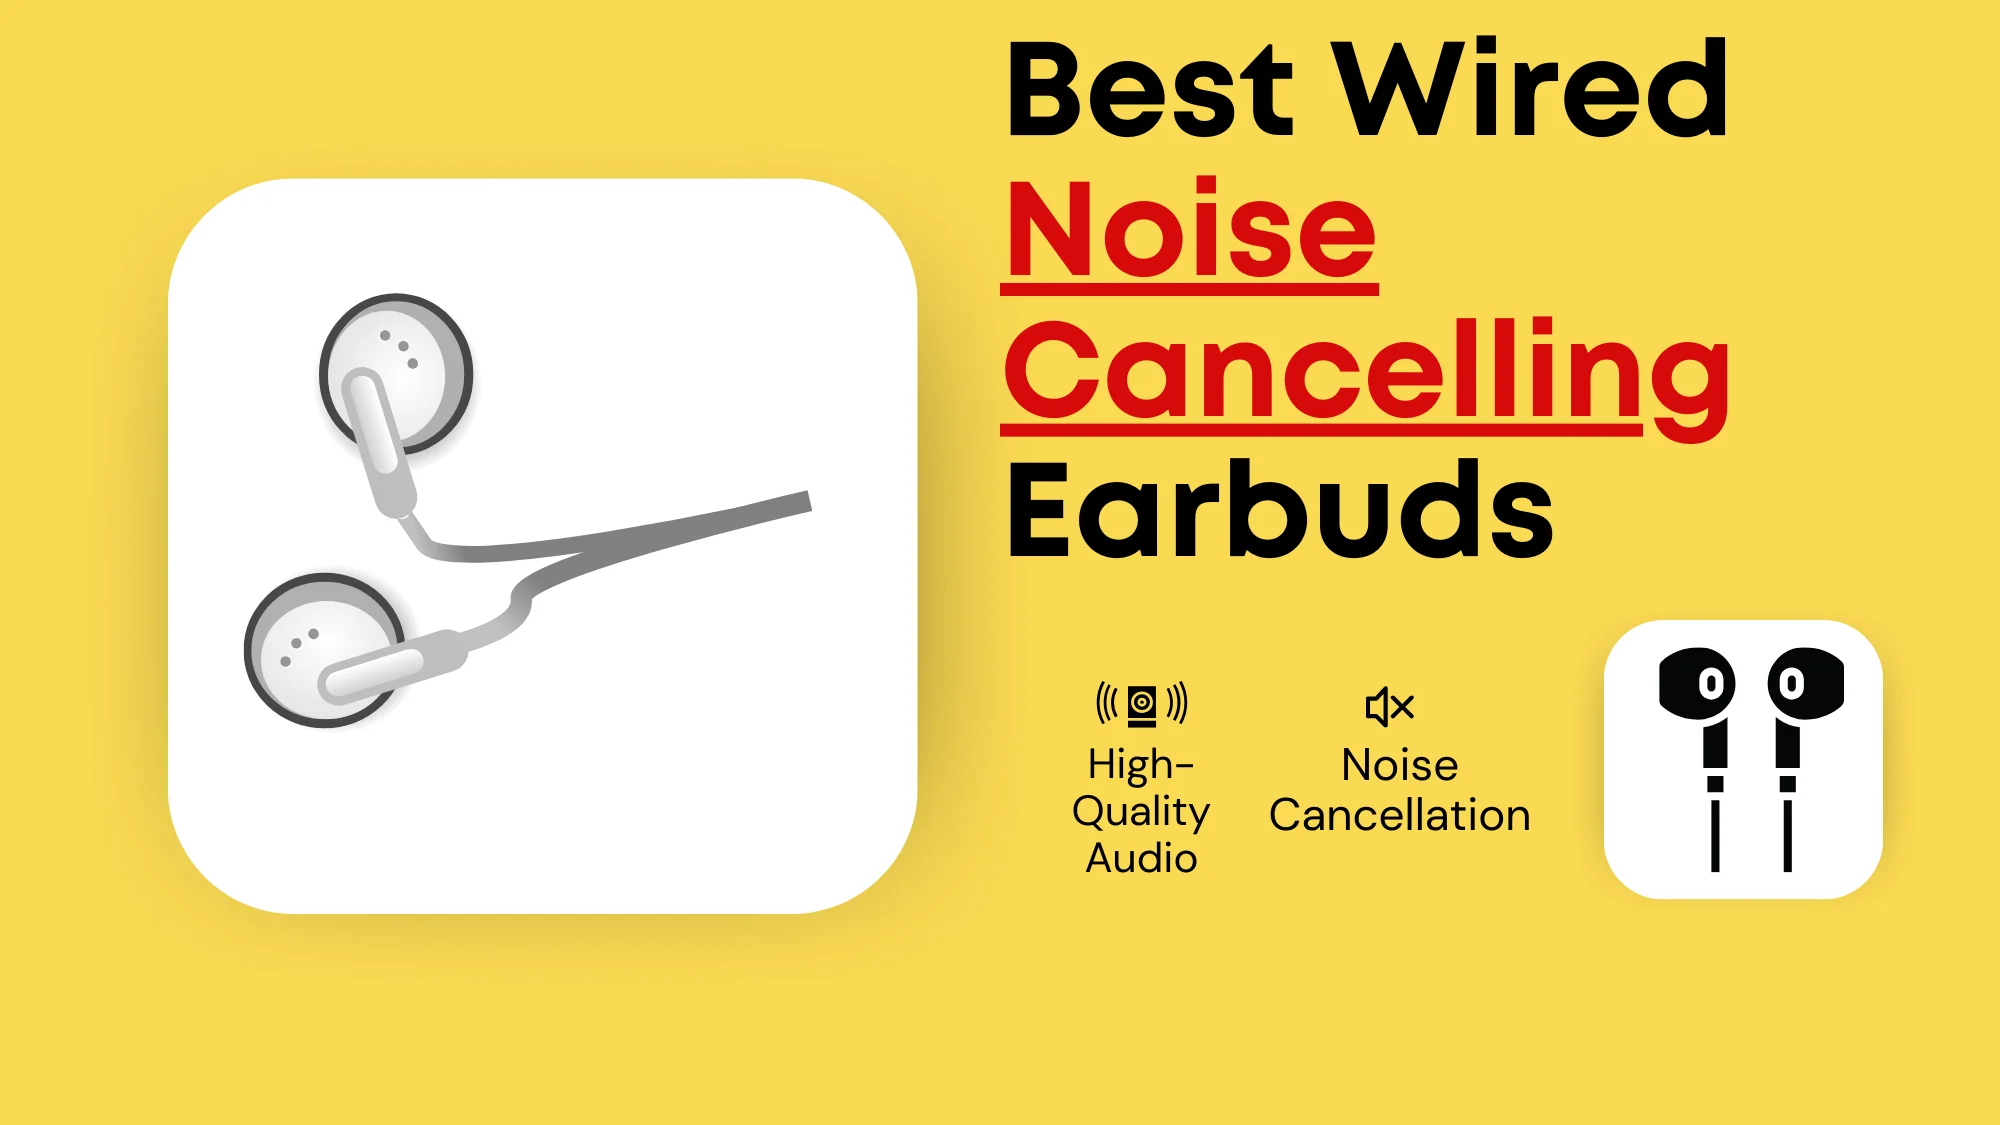 Best Wired Noise Cancelling Earbuds